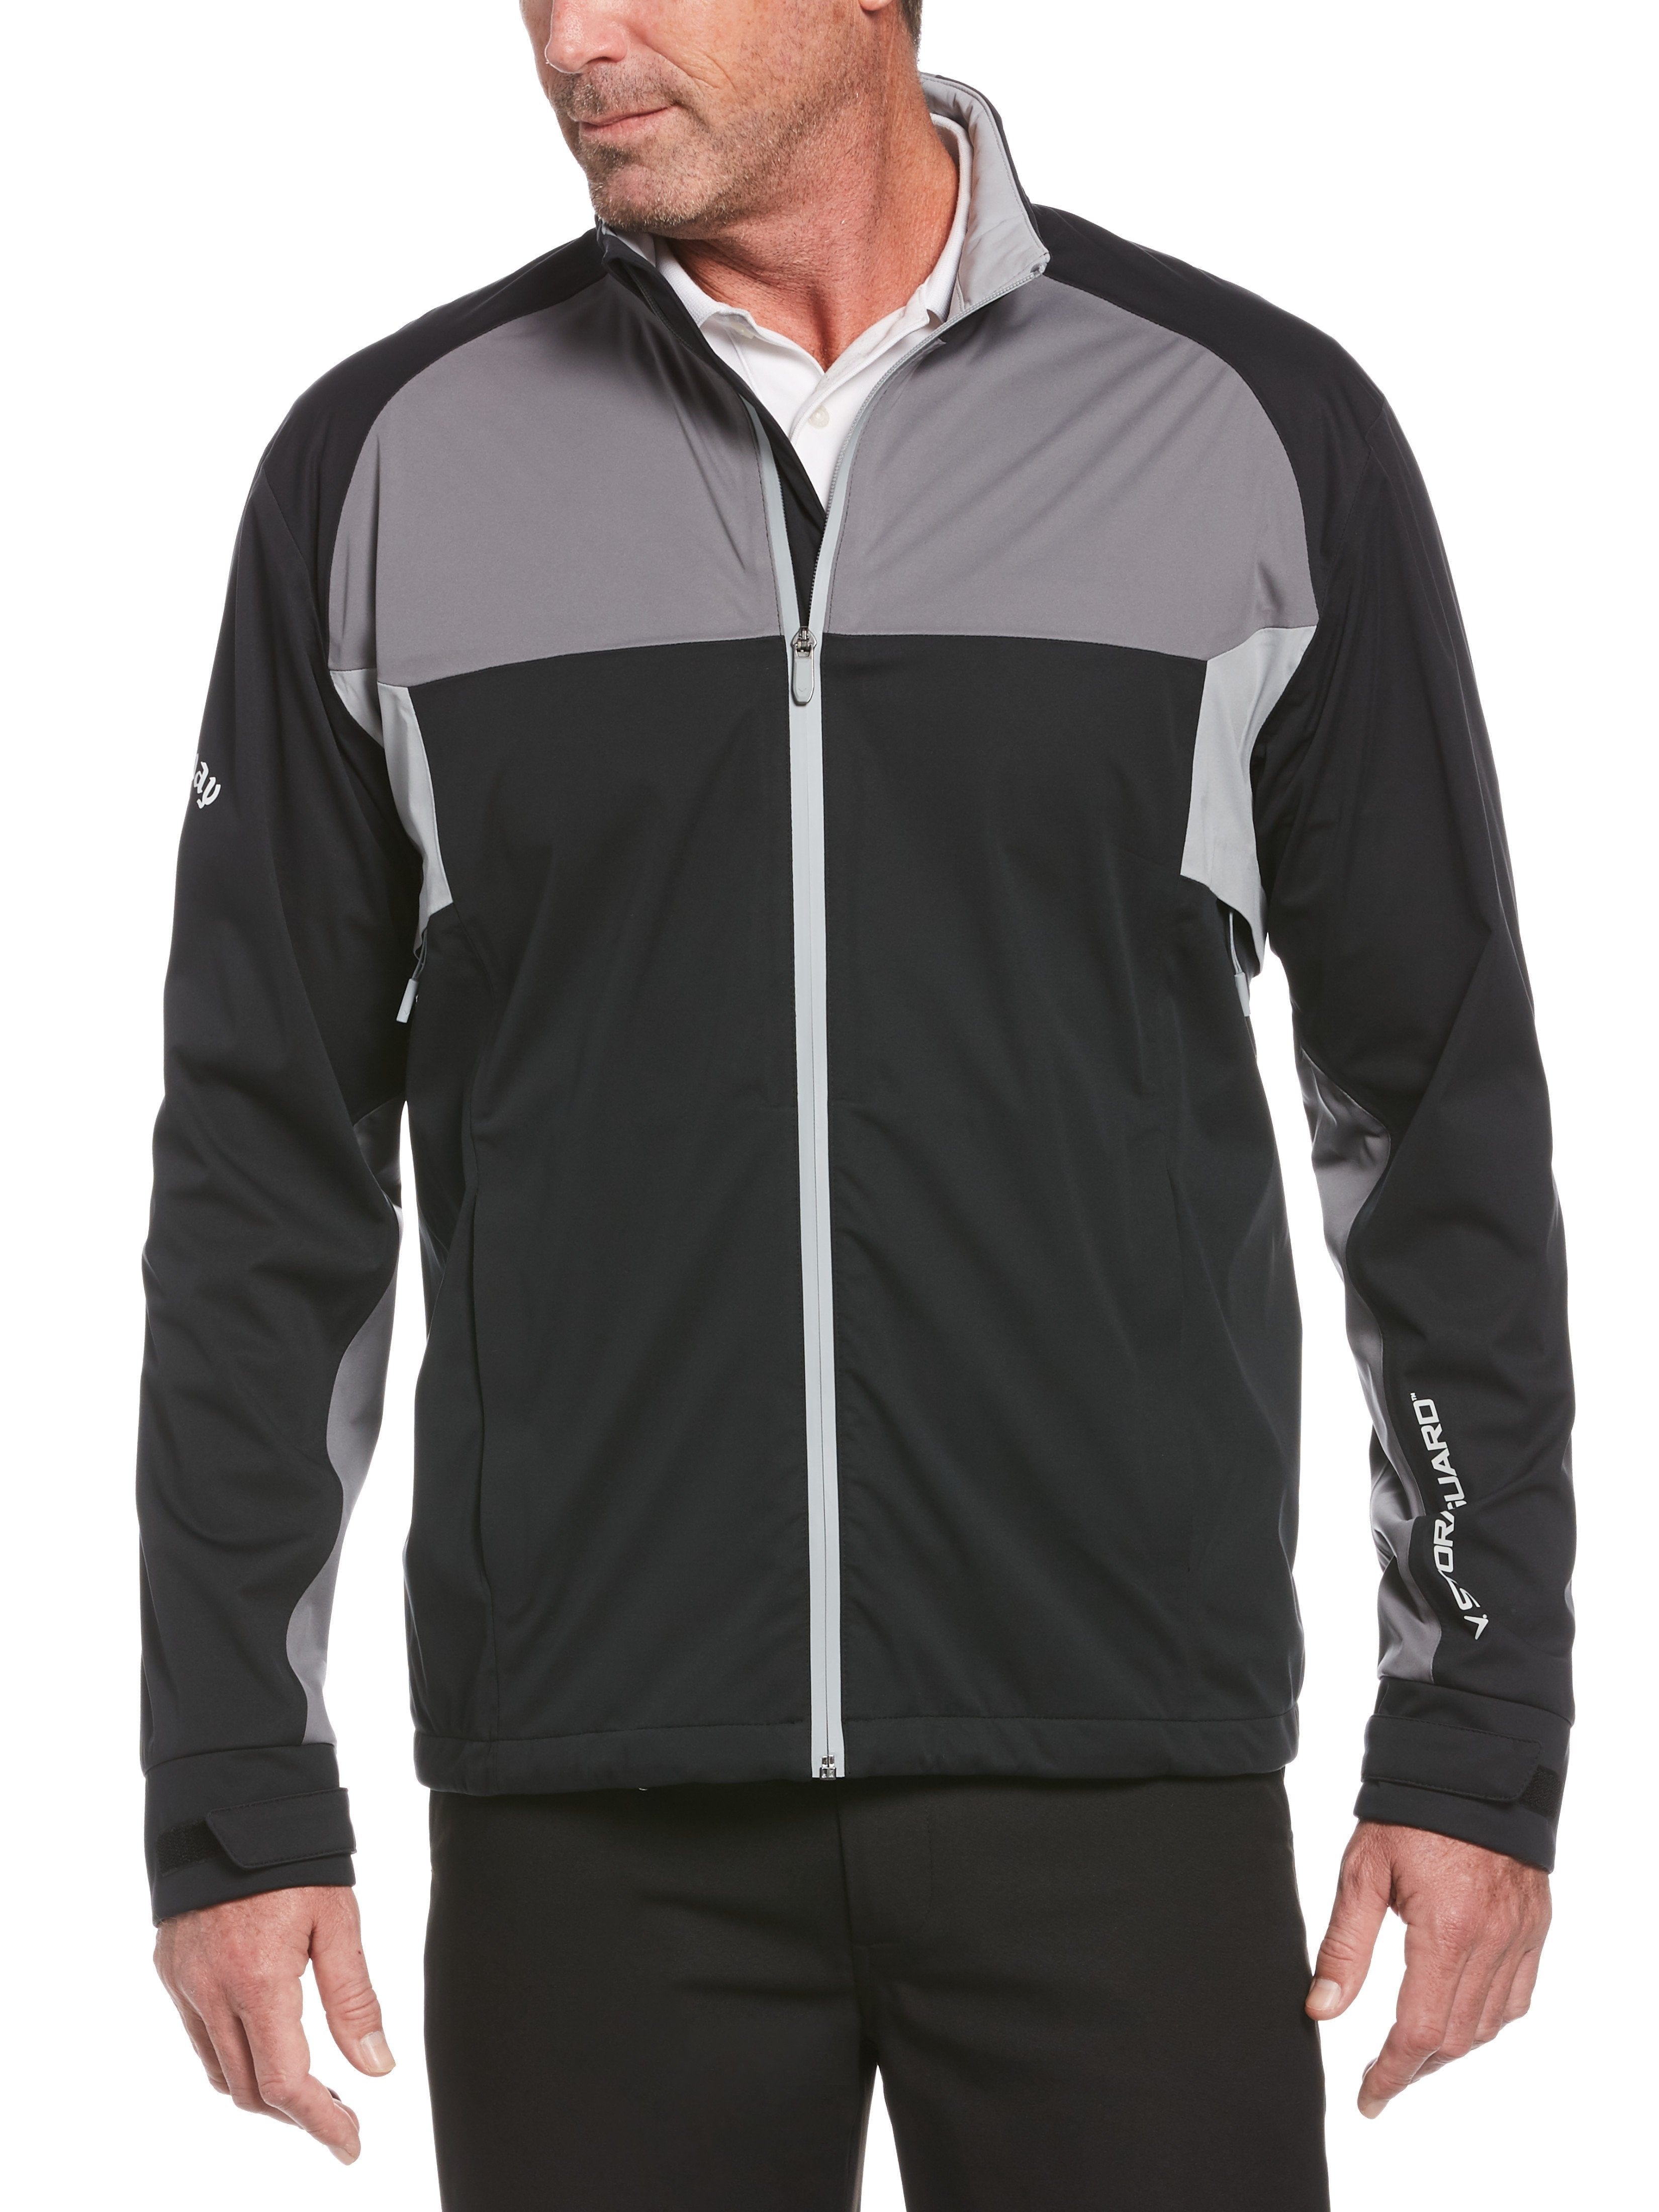 Callaway Apparel Mens Swing Tech™ StormGuard™ Water-Resistant Golf Jacket Top, Size Medium, Black, Recycled Polyester/Polyester | Golf Apparel Shop